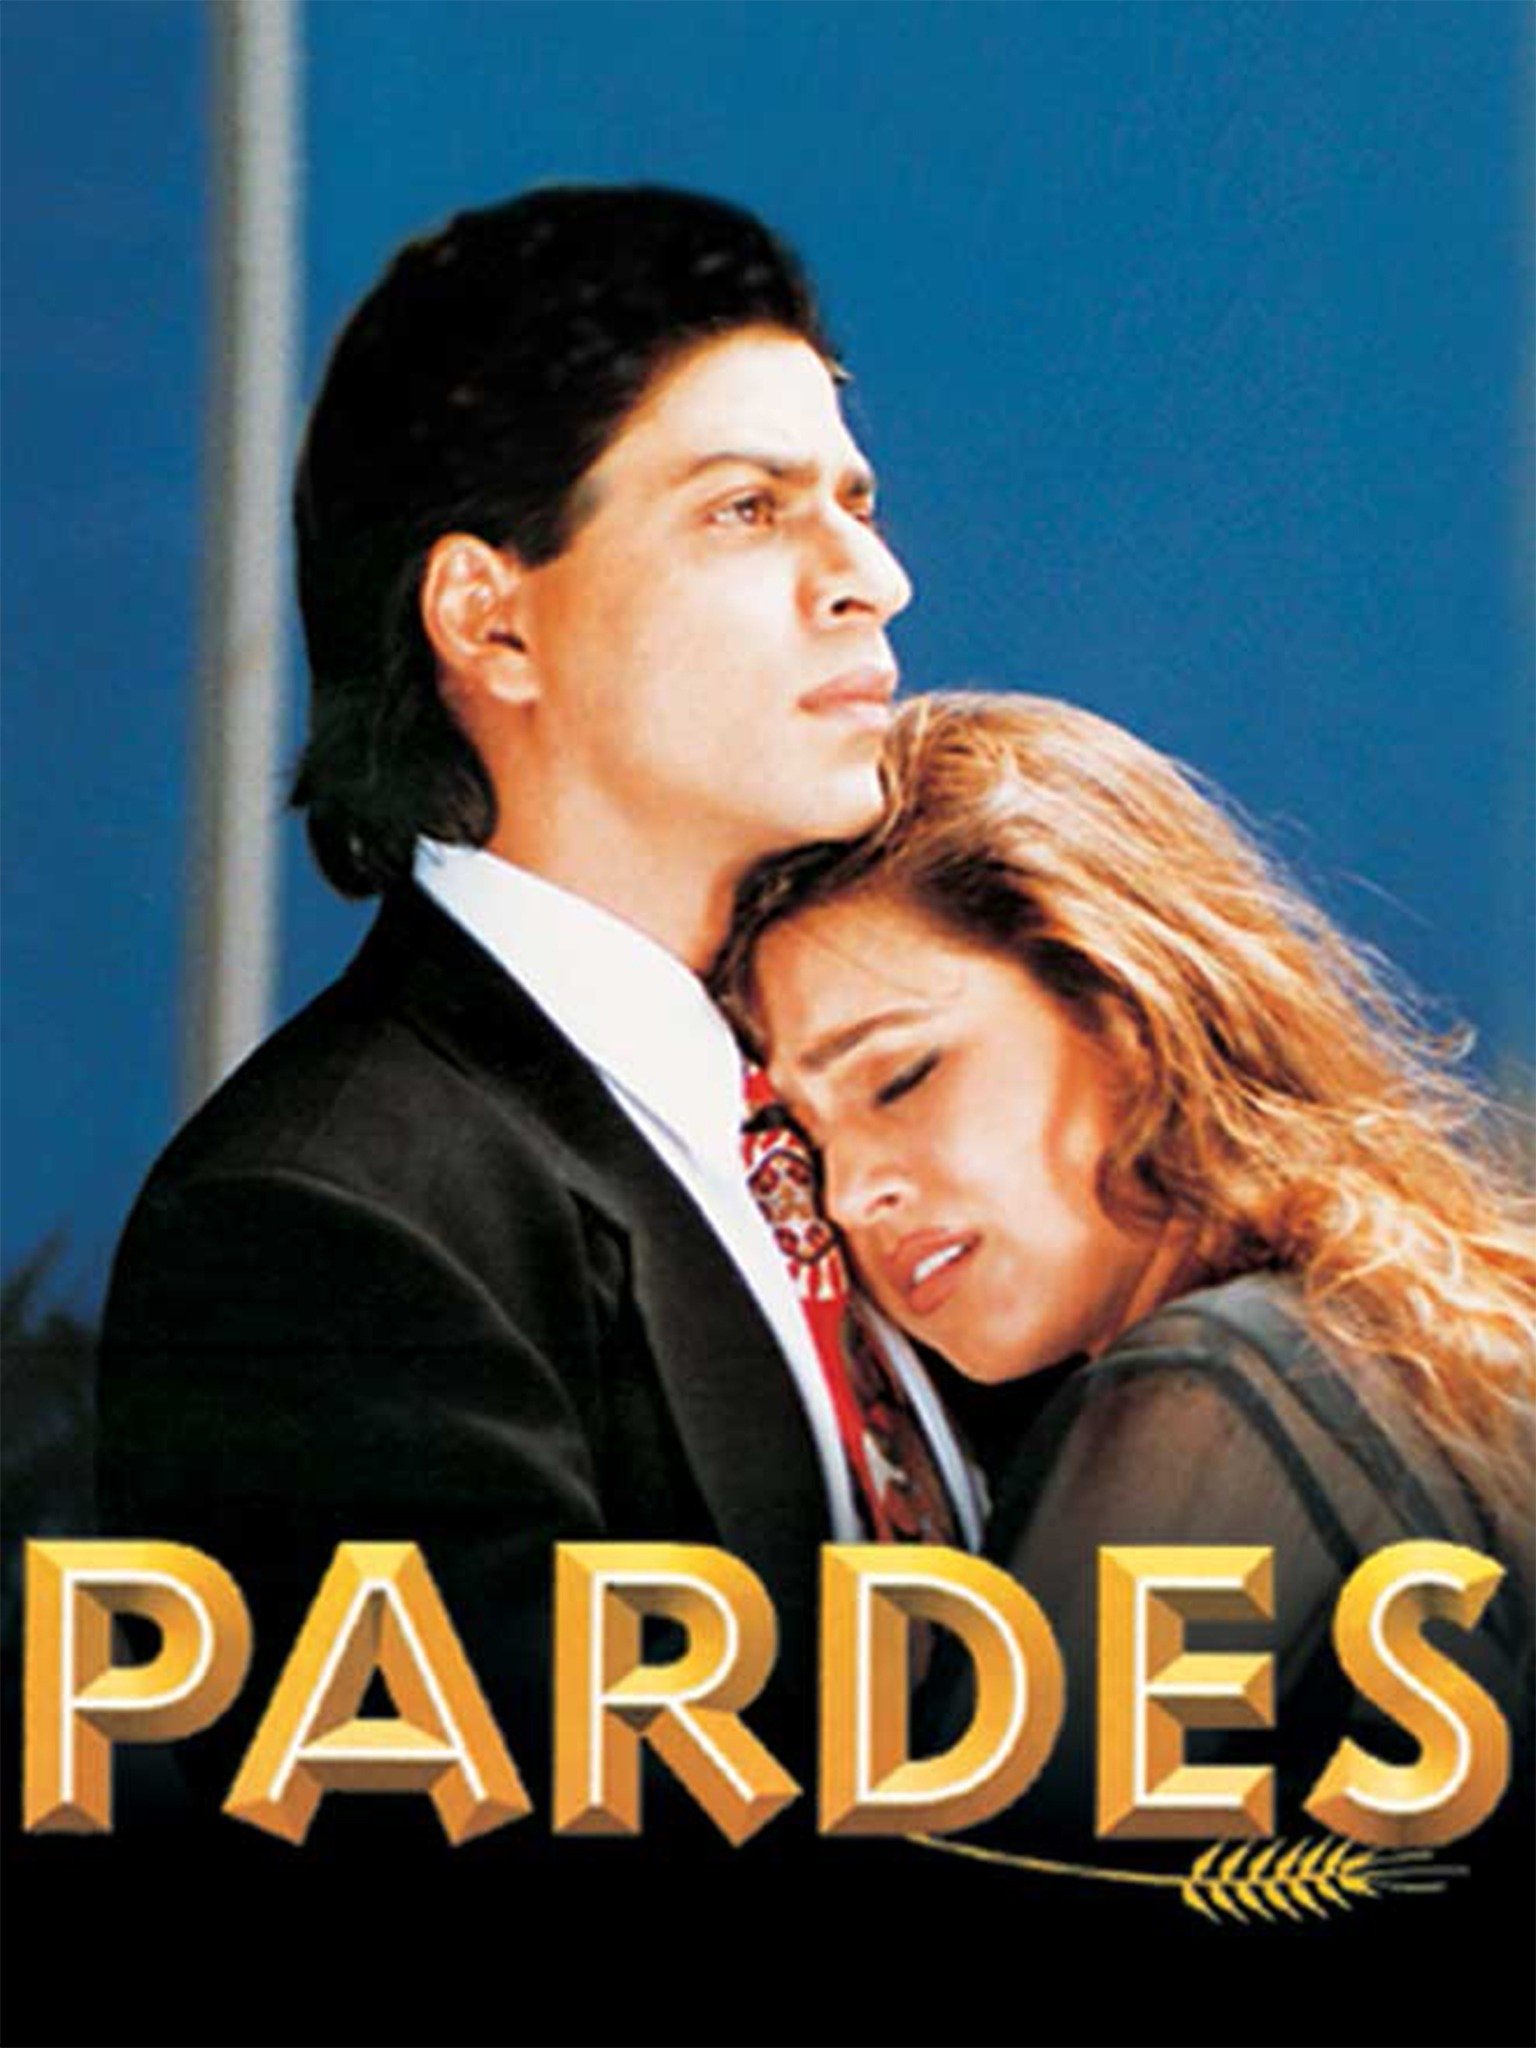 Pardes 1997 Rotten Tomatoes Find details of pardes along with its showtimes, movie review, trailer, teaser, full video songs, showtimes and cast. pardes 1997 rotten tomatoes